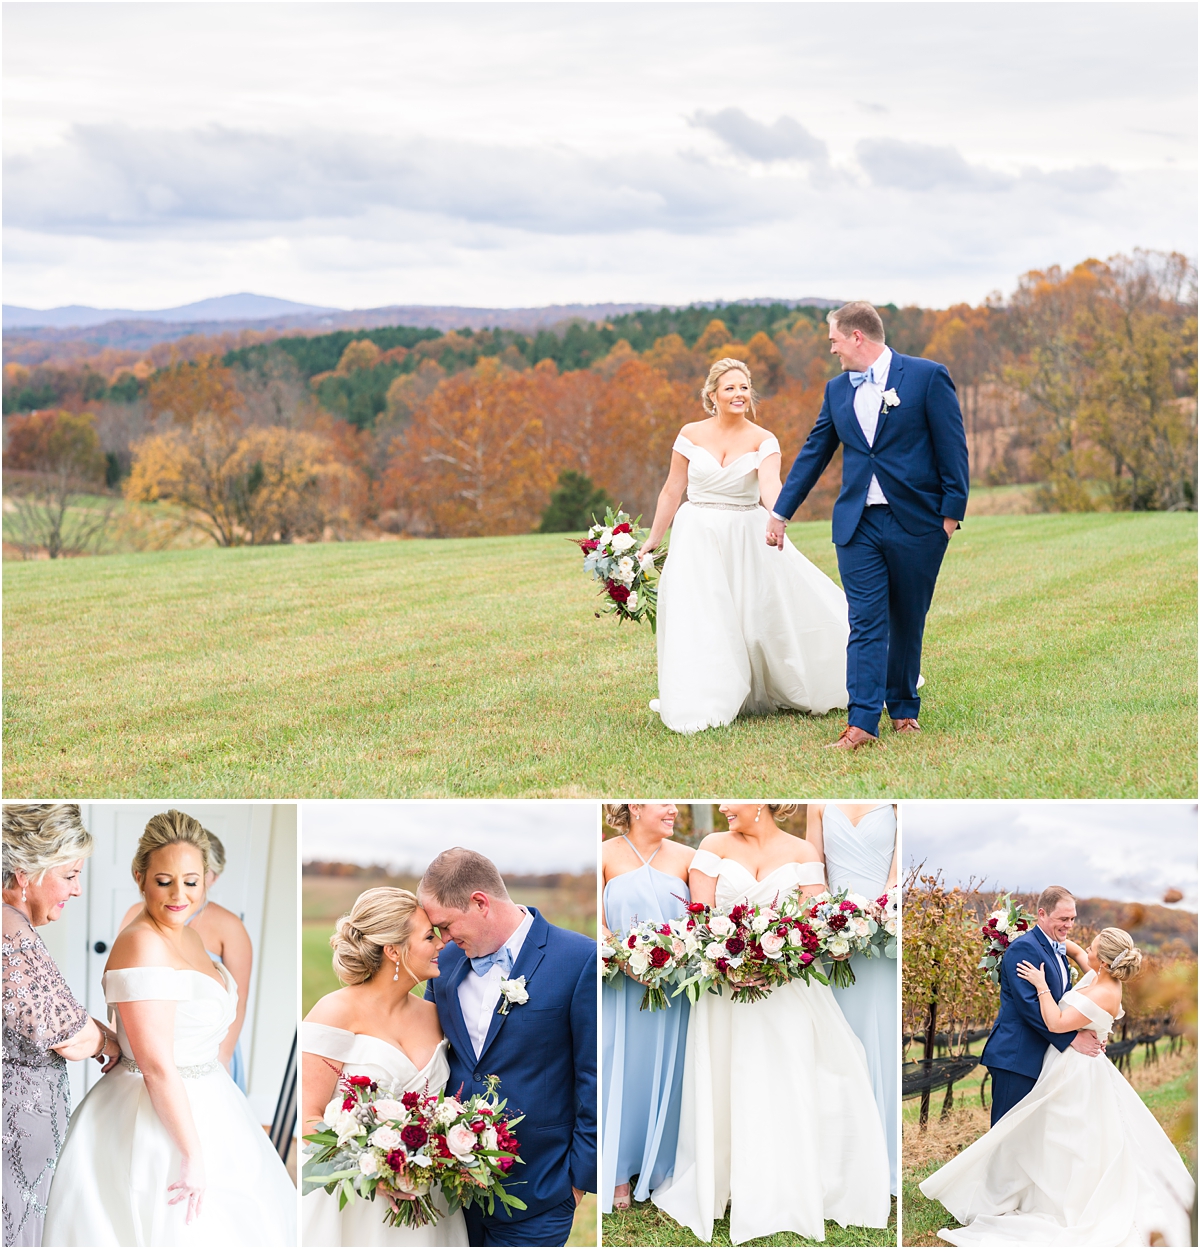 Stone Tower Winery wedding photographed by Virginia wedding photographer Alexandra Mandato Photography